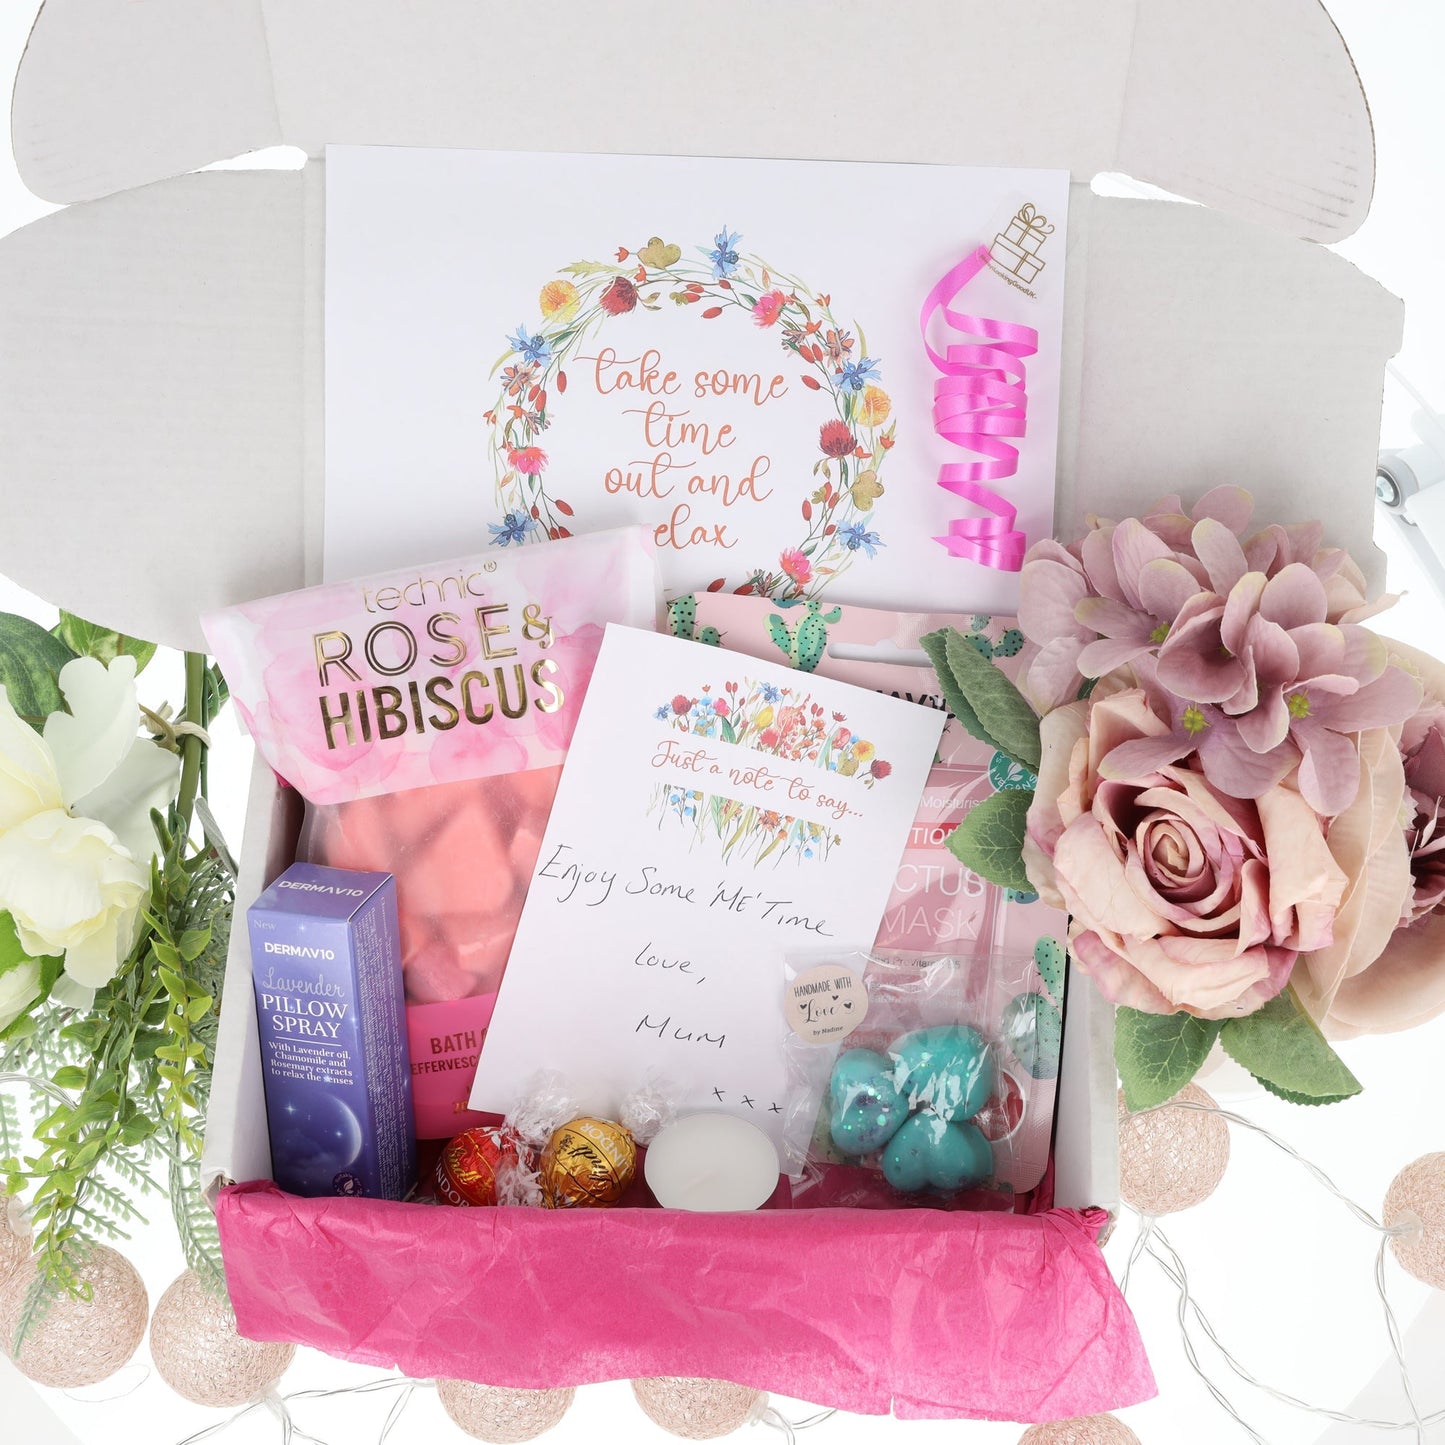 Mother's Day Medium Bath Crumble and Pamper Gift Set  - Always Looking Good -   